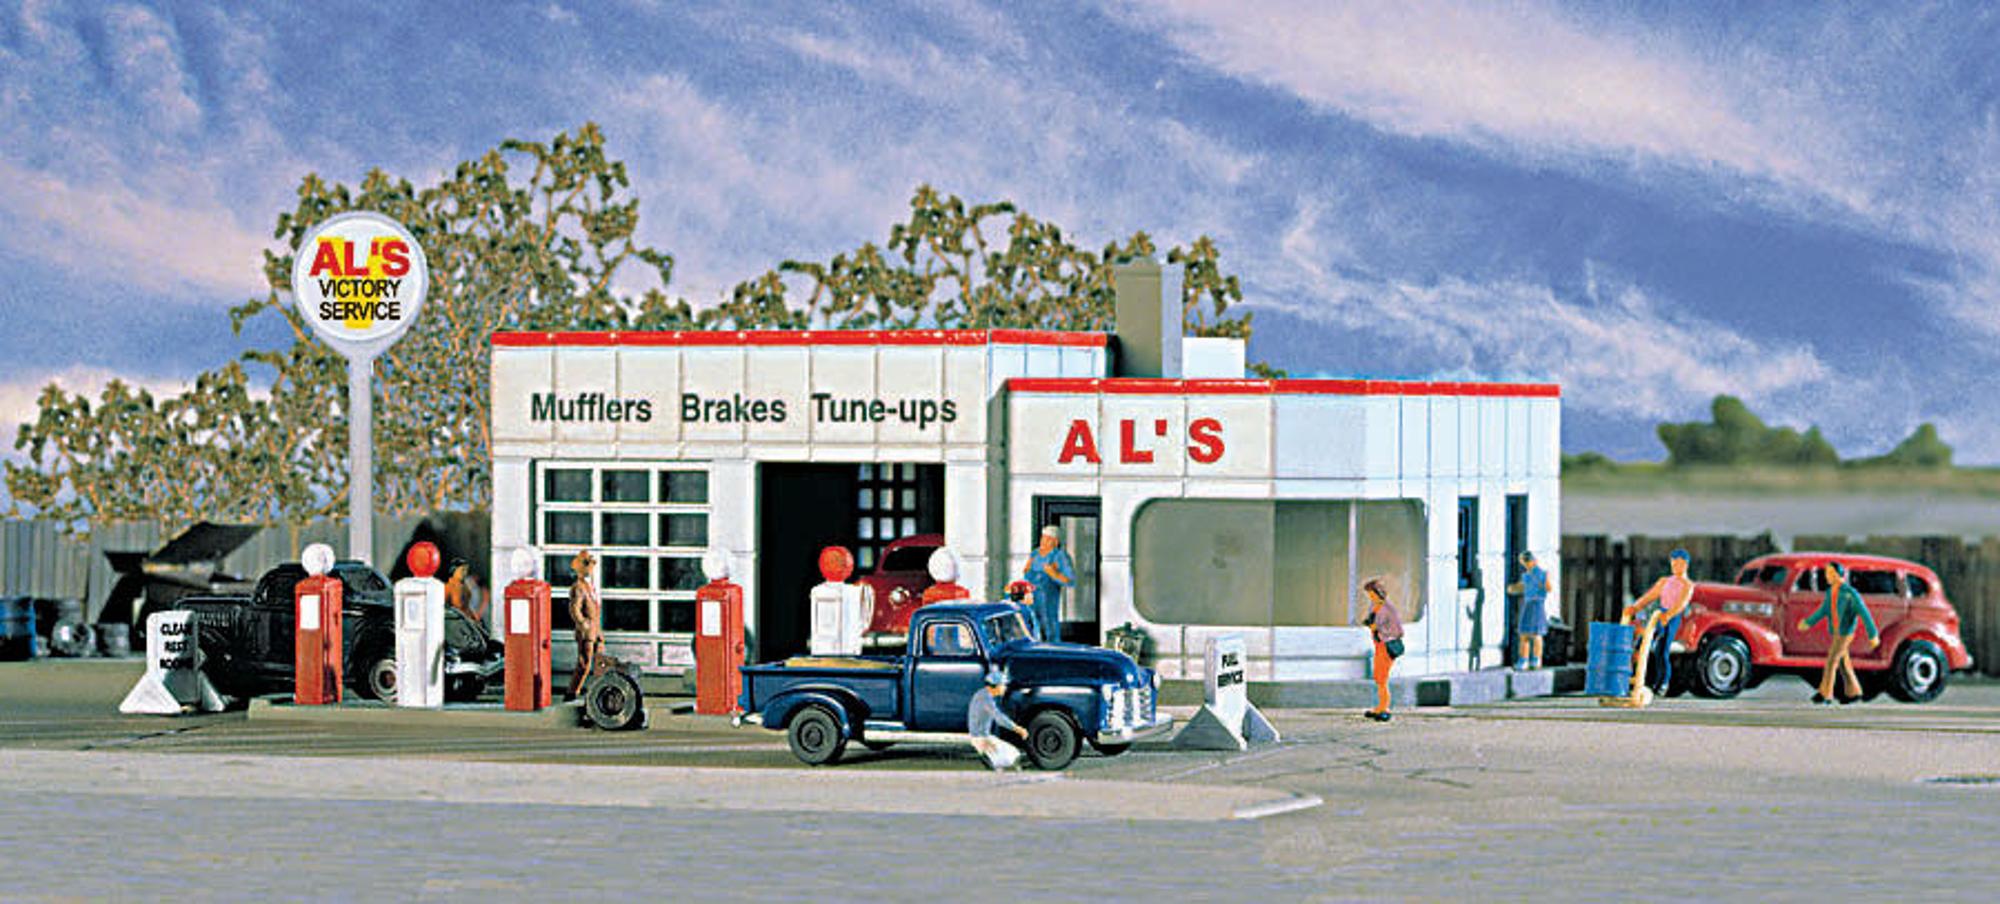 N-Scale Als Victory Service Gas Station Kit